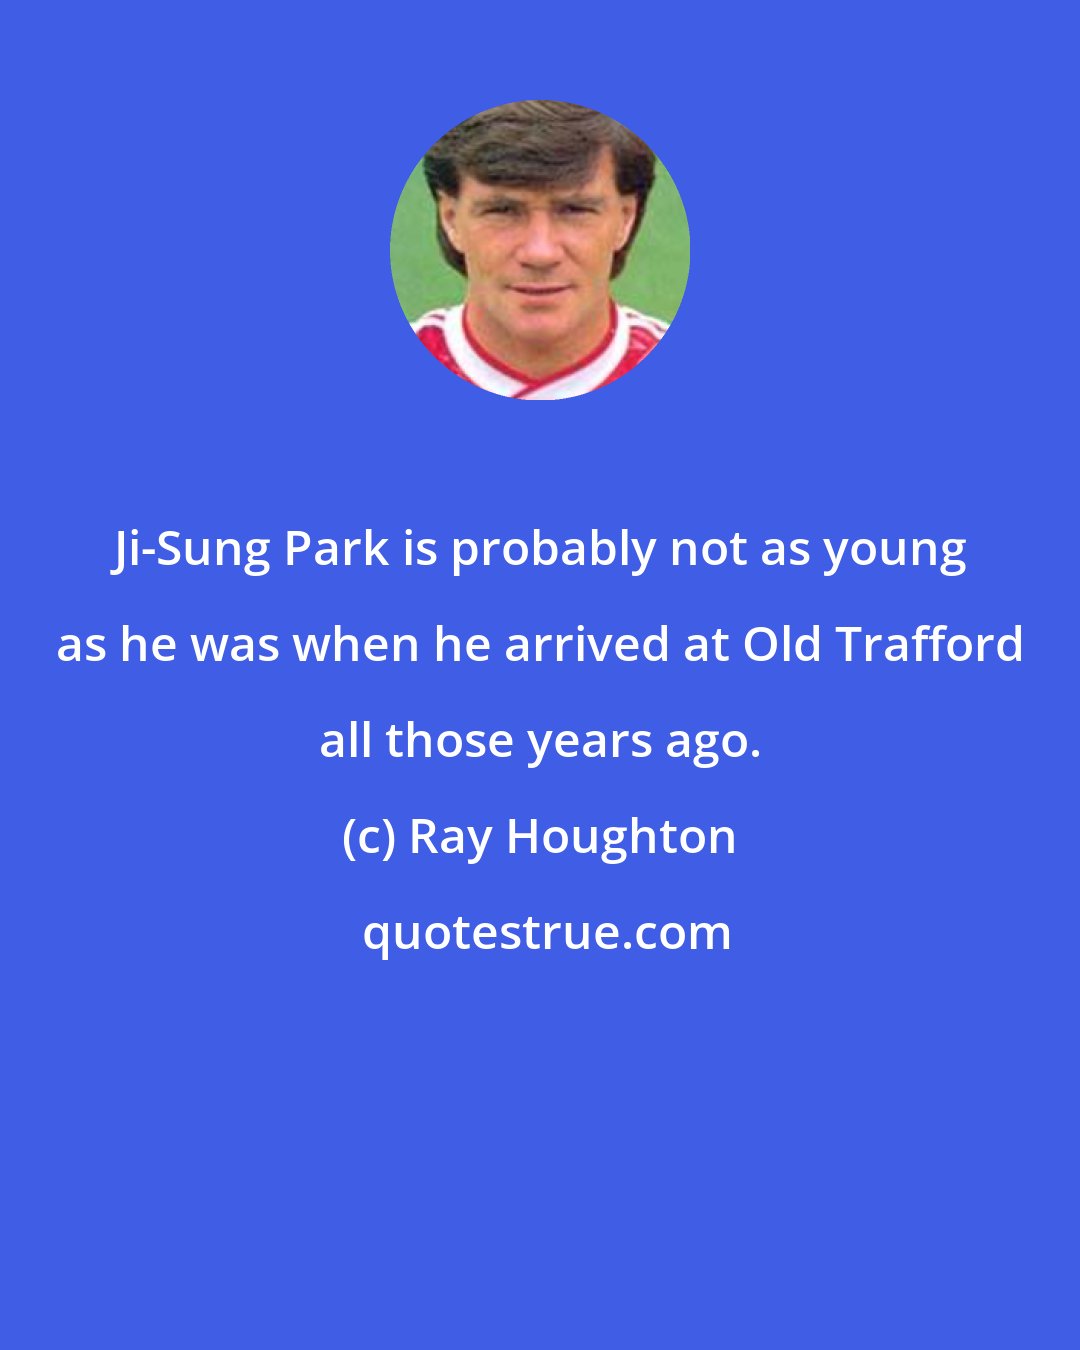 Ray Houghton: Ji-Sung Park is probably not as young as he was when he arrived at Old Trafford all those years ago.